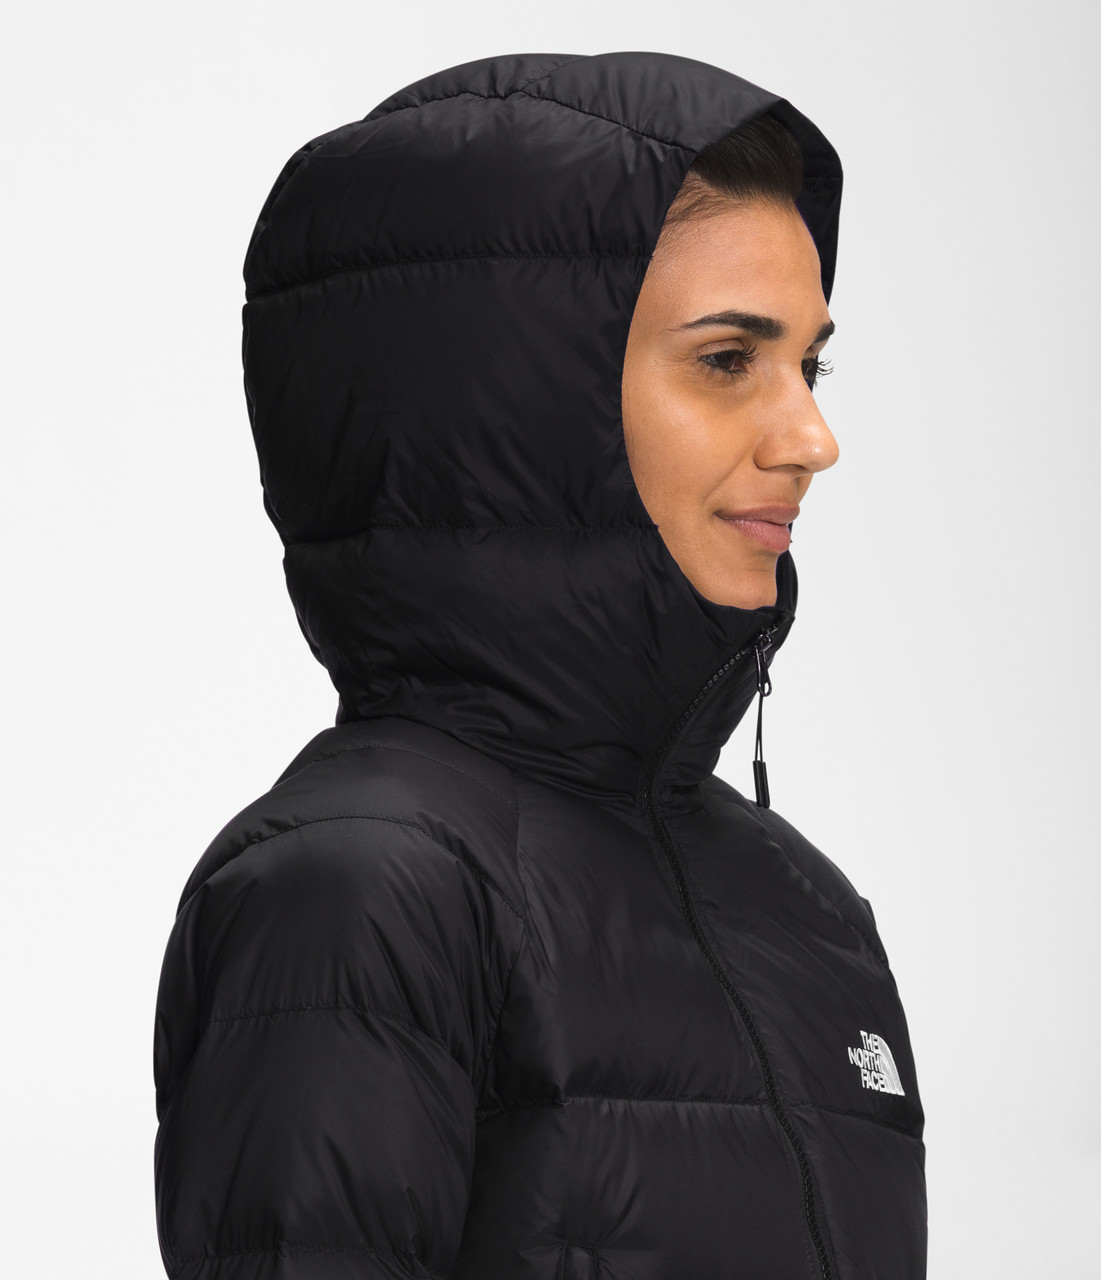 The North Face Hydrenalite Down Hooded Jacket - Women's | MEC